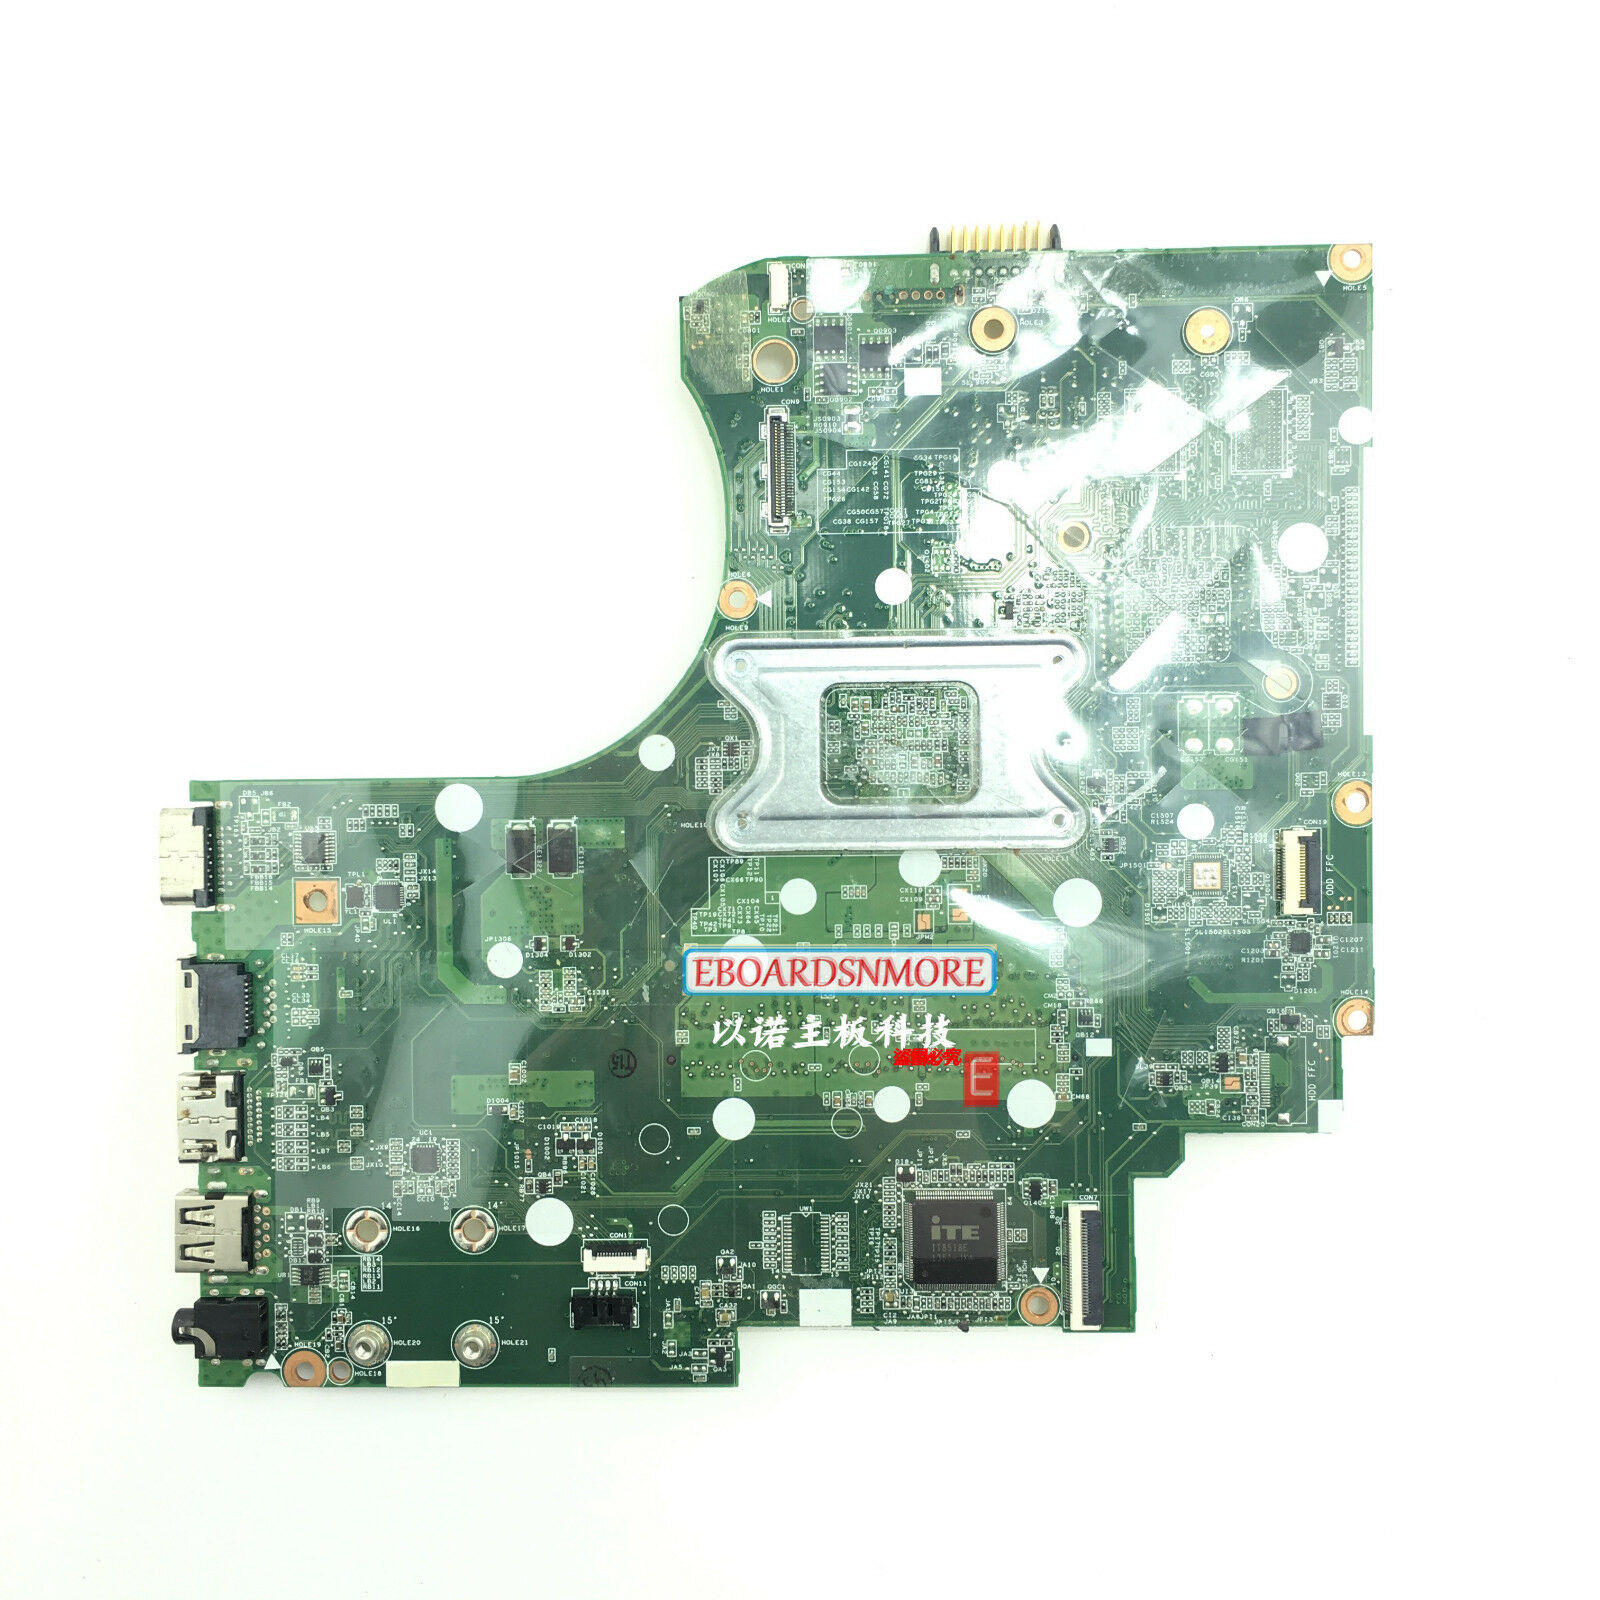 747148-501 for HP 15-D laptop motherboard integrated A4-5000 CPU Memory Type: DDR3 SDRAM Socket Type: SEE P